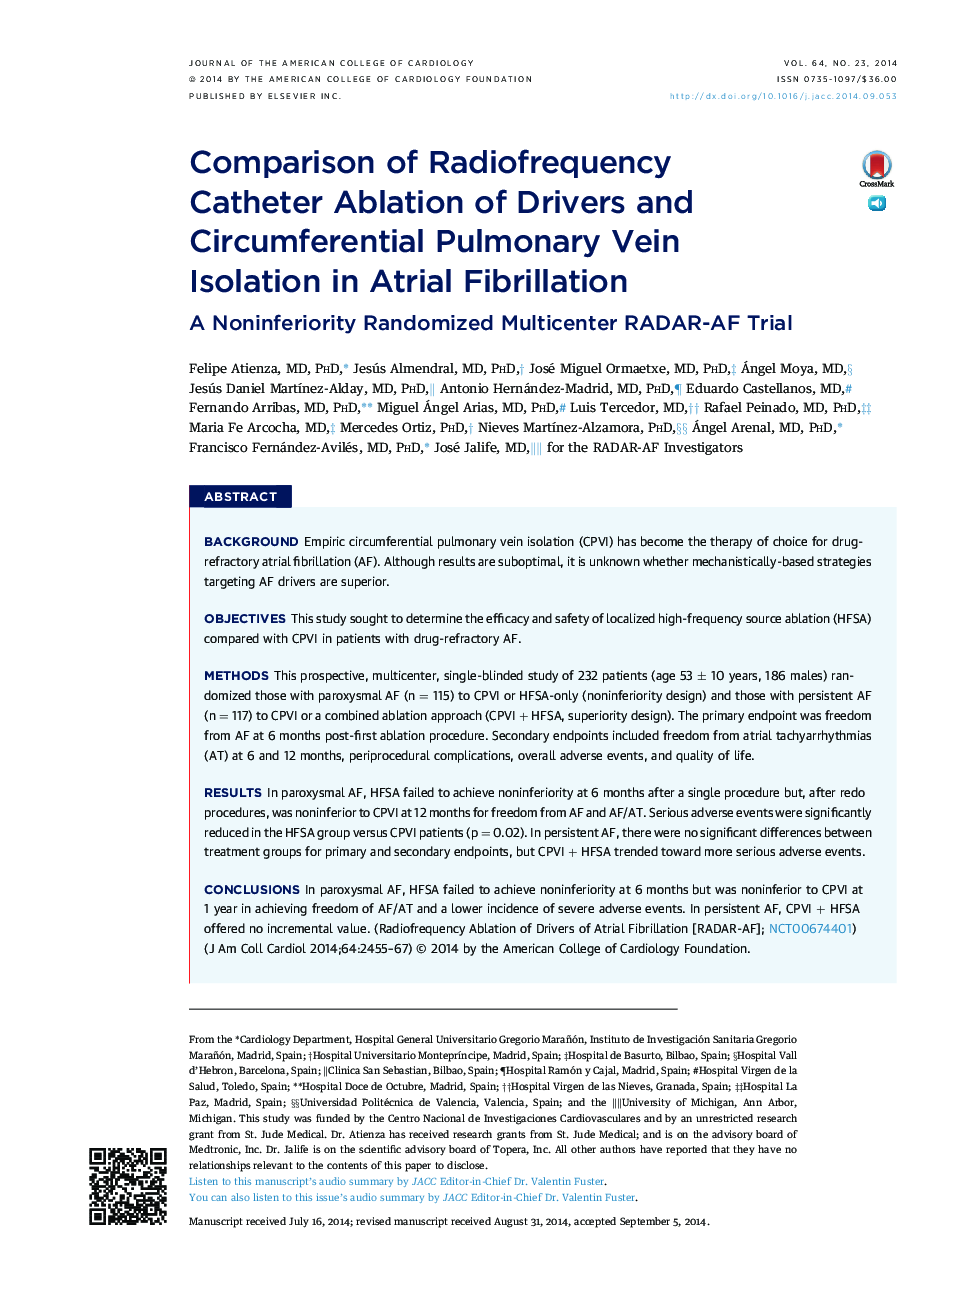 Comparison of Radiofrequency Catheter Ablation of Drivers and Circumferential Pulmonary Vein Isolation in Atrial Fibrillation : A Noninferiority Randomized Multicenter RADAR-AF Trial